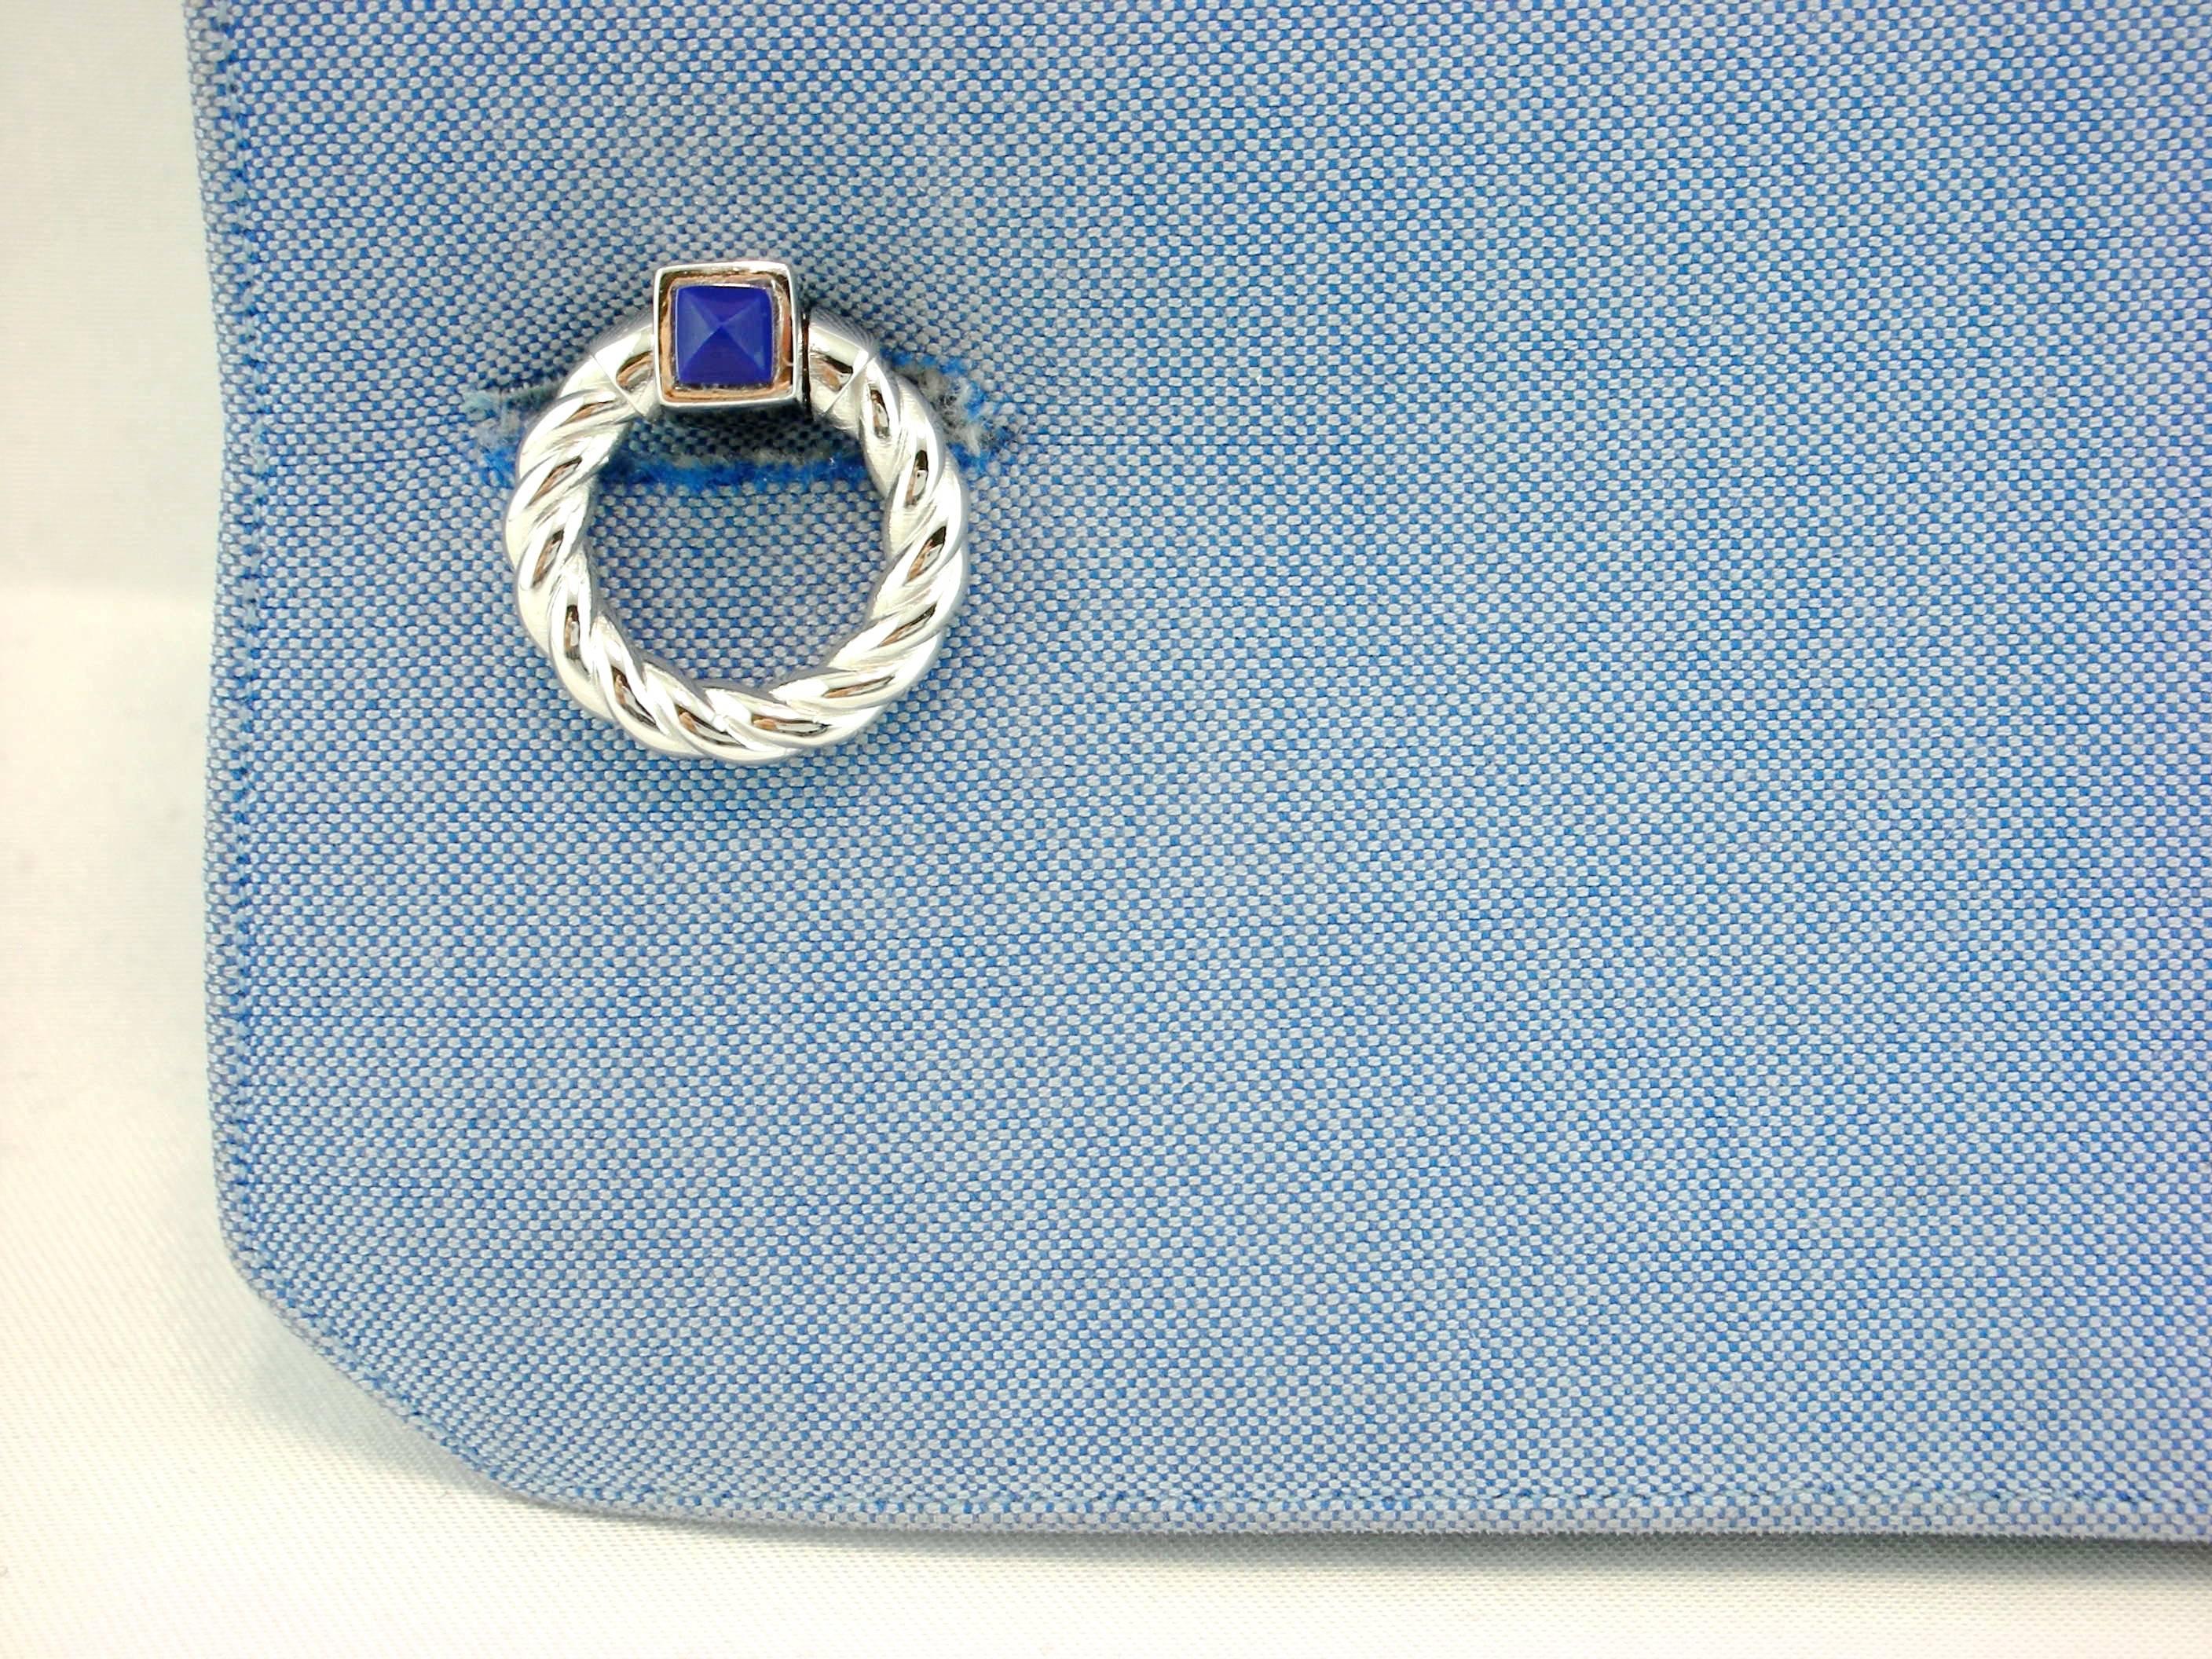 Alex Jona design collection, hand crafted in Italy, rhodium plated sterling silver double ring folding cufflinks with Lapis cabochons. Marked JONA 925.
Alex Jona cufflinks stand out, not only for their special design and for the excellent quality,